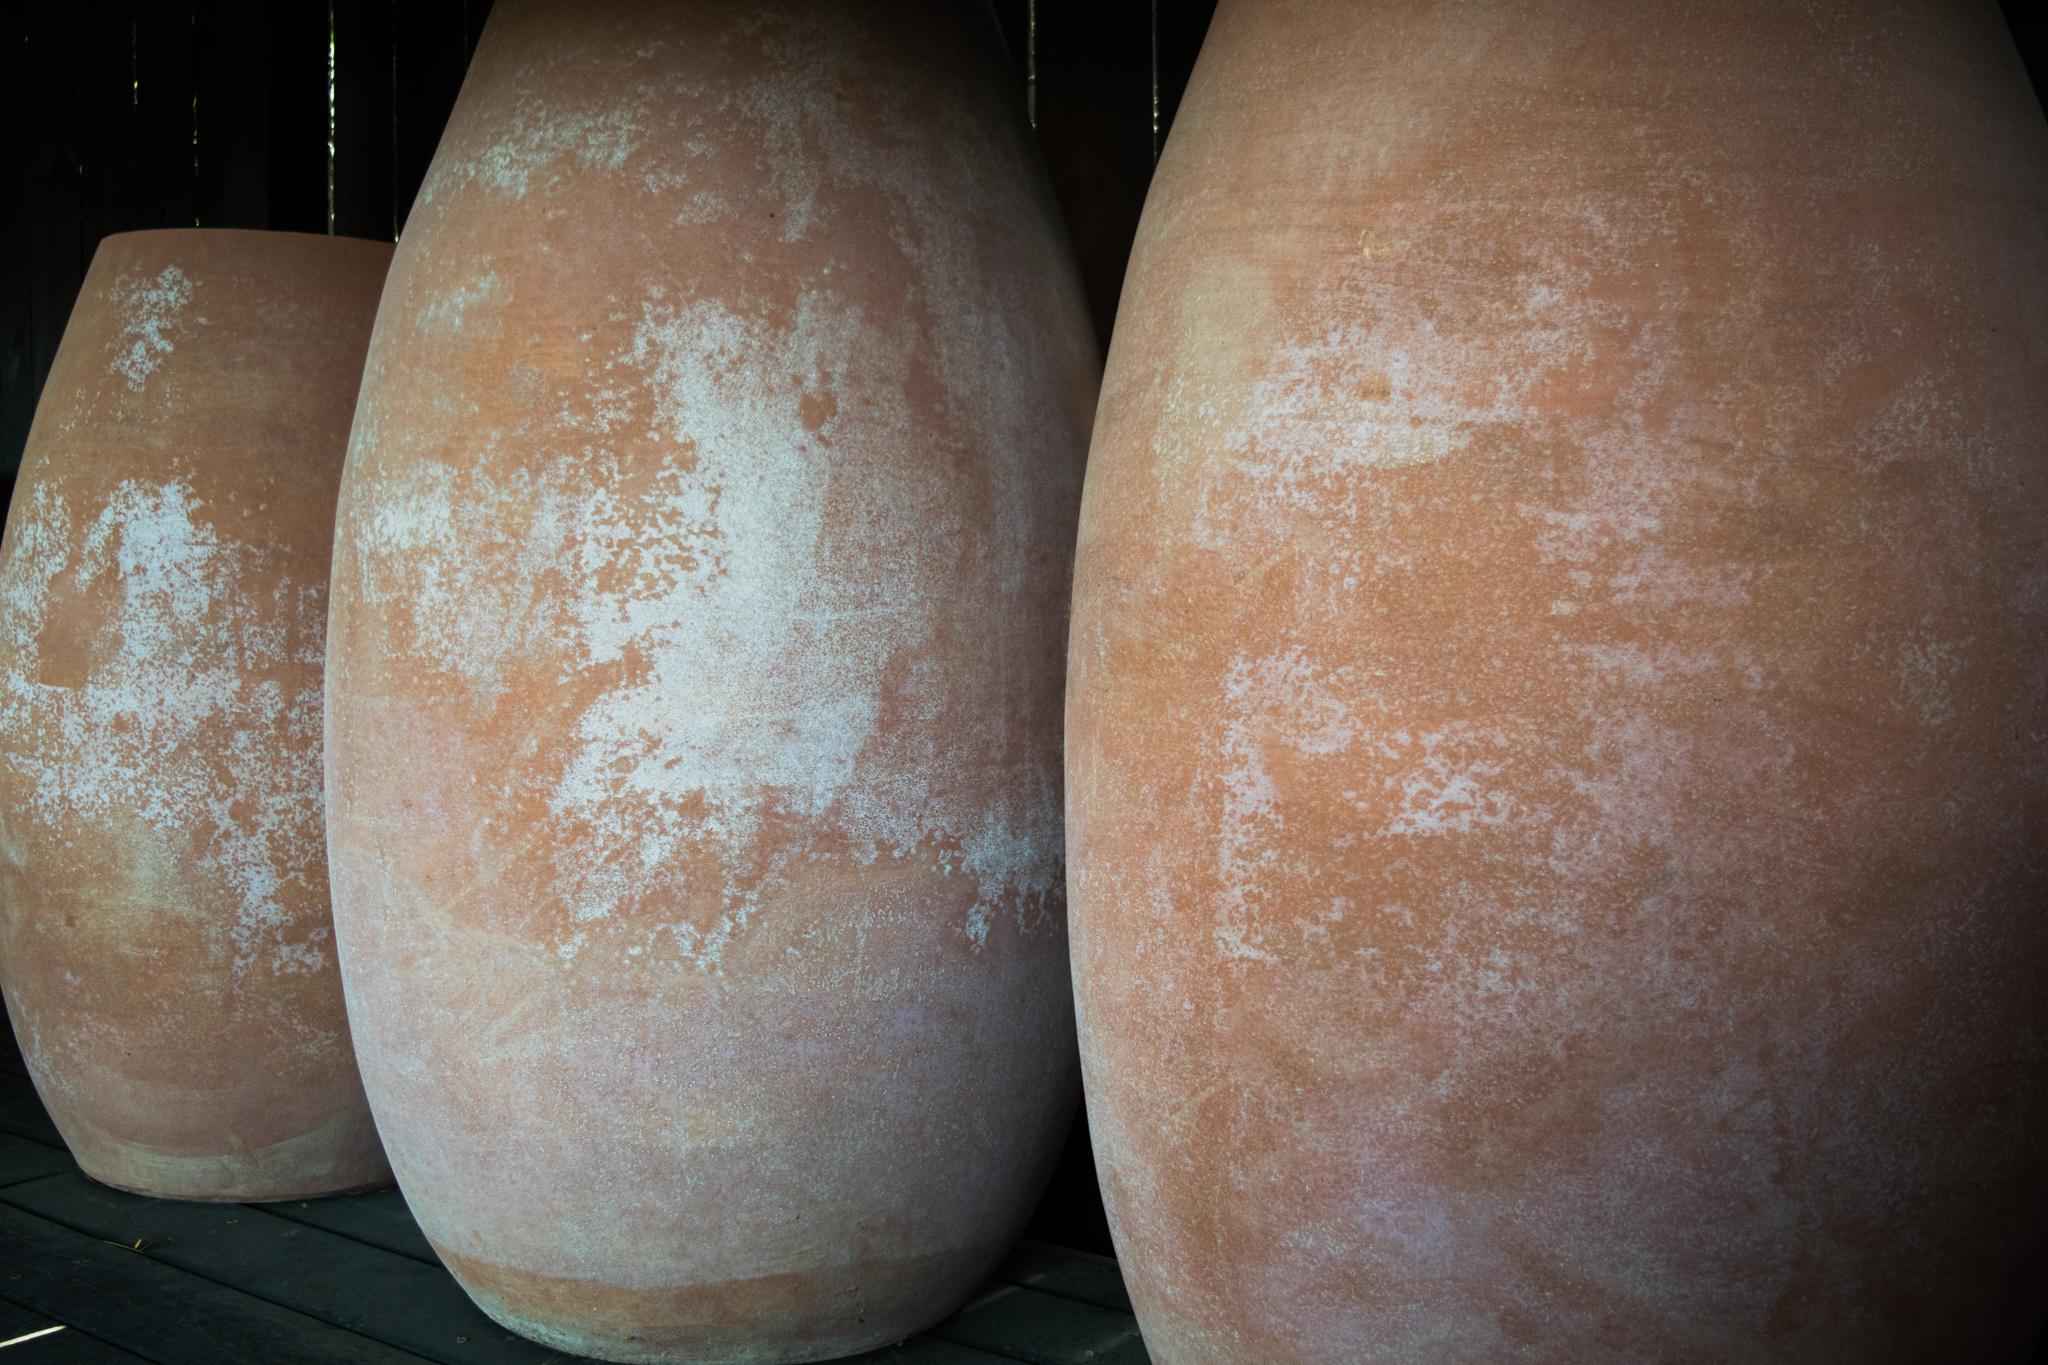 Poggi Ugo creates their collection of handmade terracotta using rudimentary tools and ancient techniques. Each pot requires an expert skillset to create and can take up to 120 days to complete. Due to the dense nature of impruneta terracotta, this